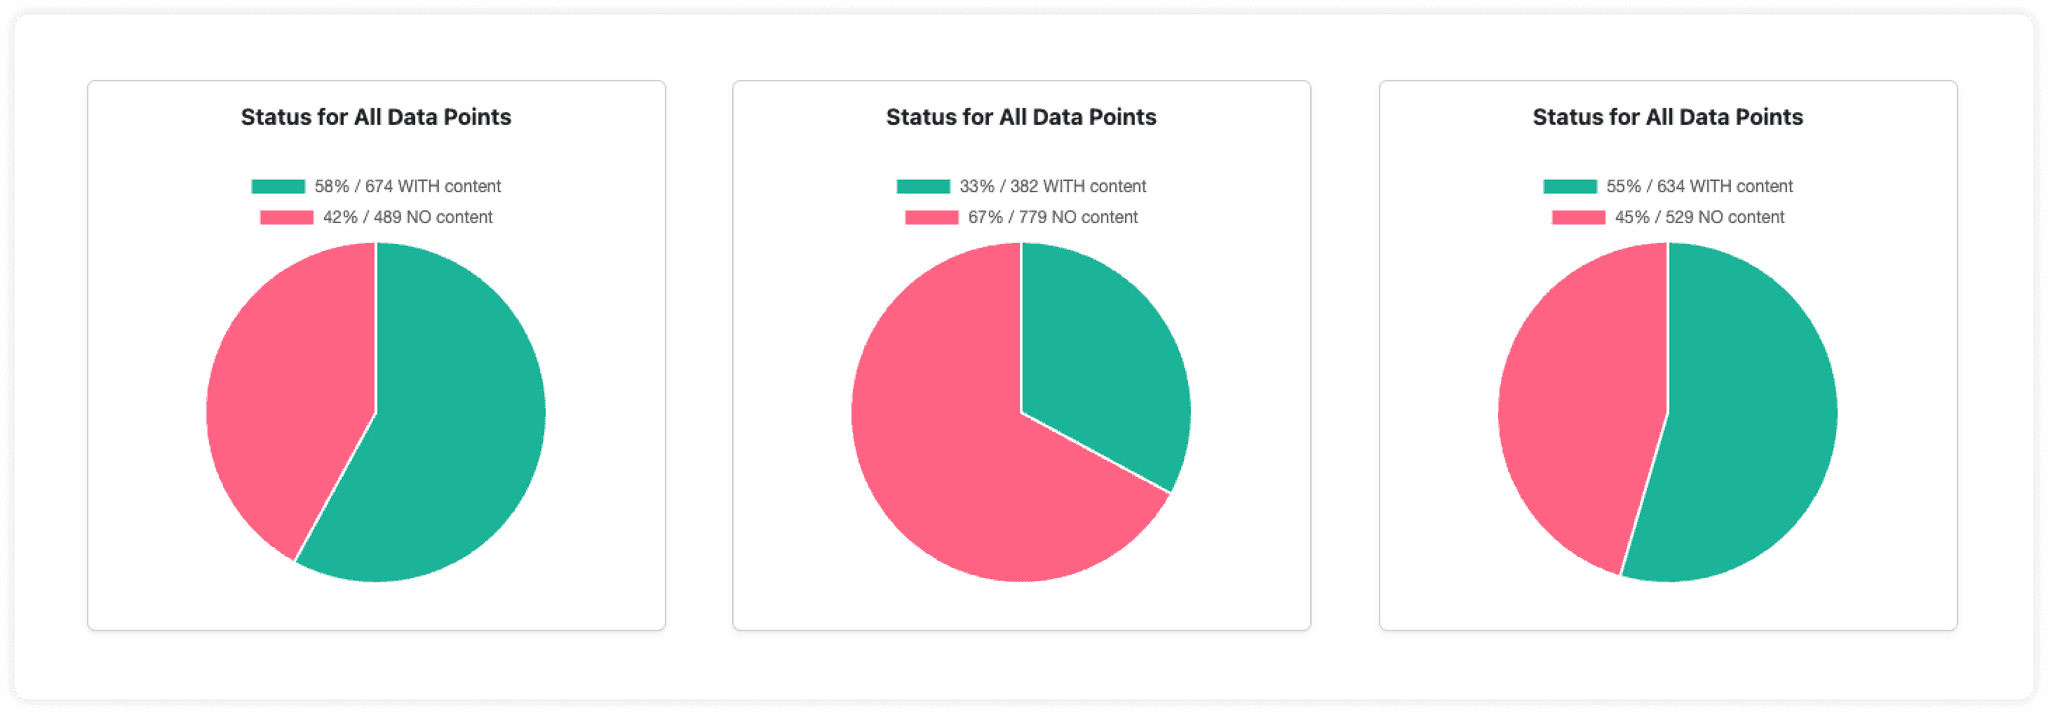 esg esrs 1163 and ai other pie charts